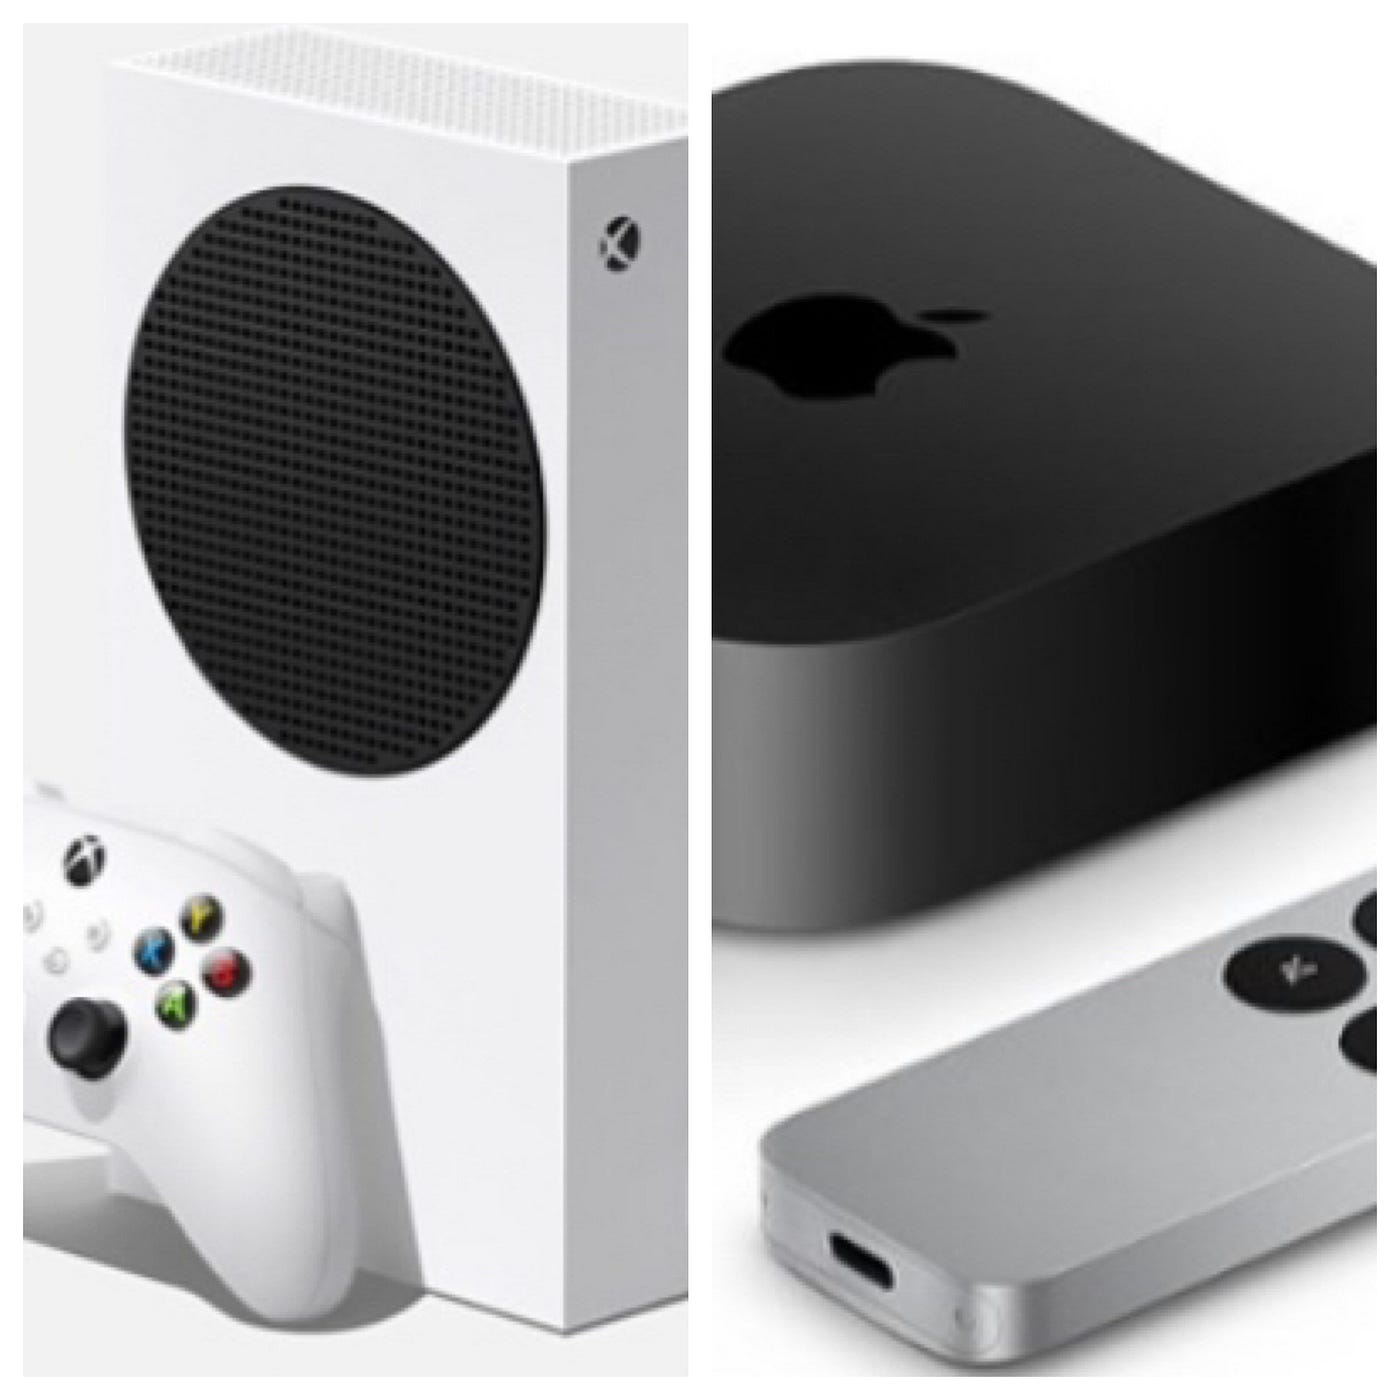 Xbox Series S is competing with Apple TV 4K | by Kyle George | Medium